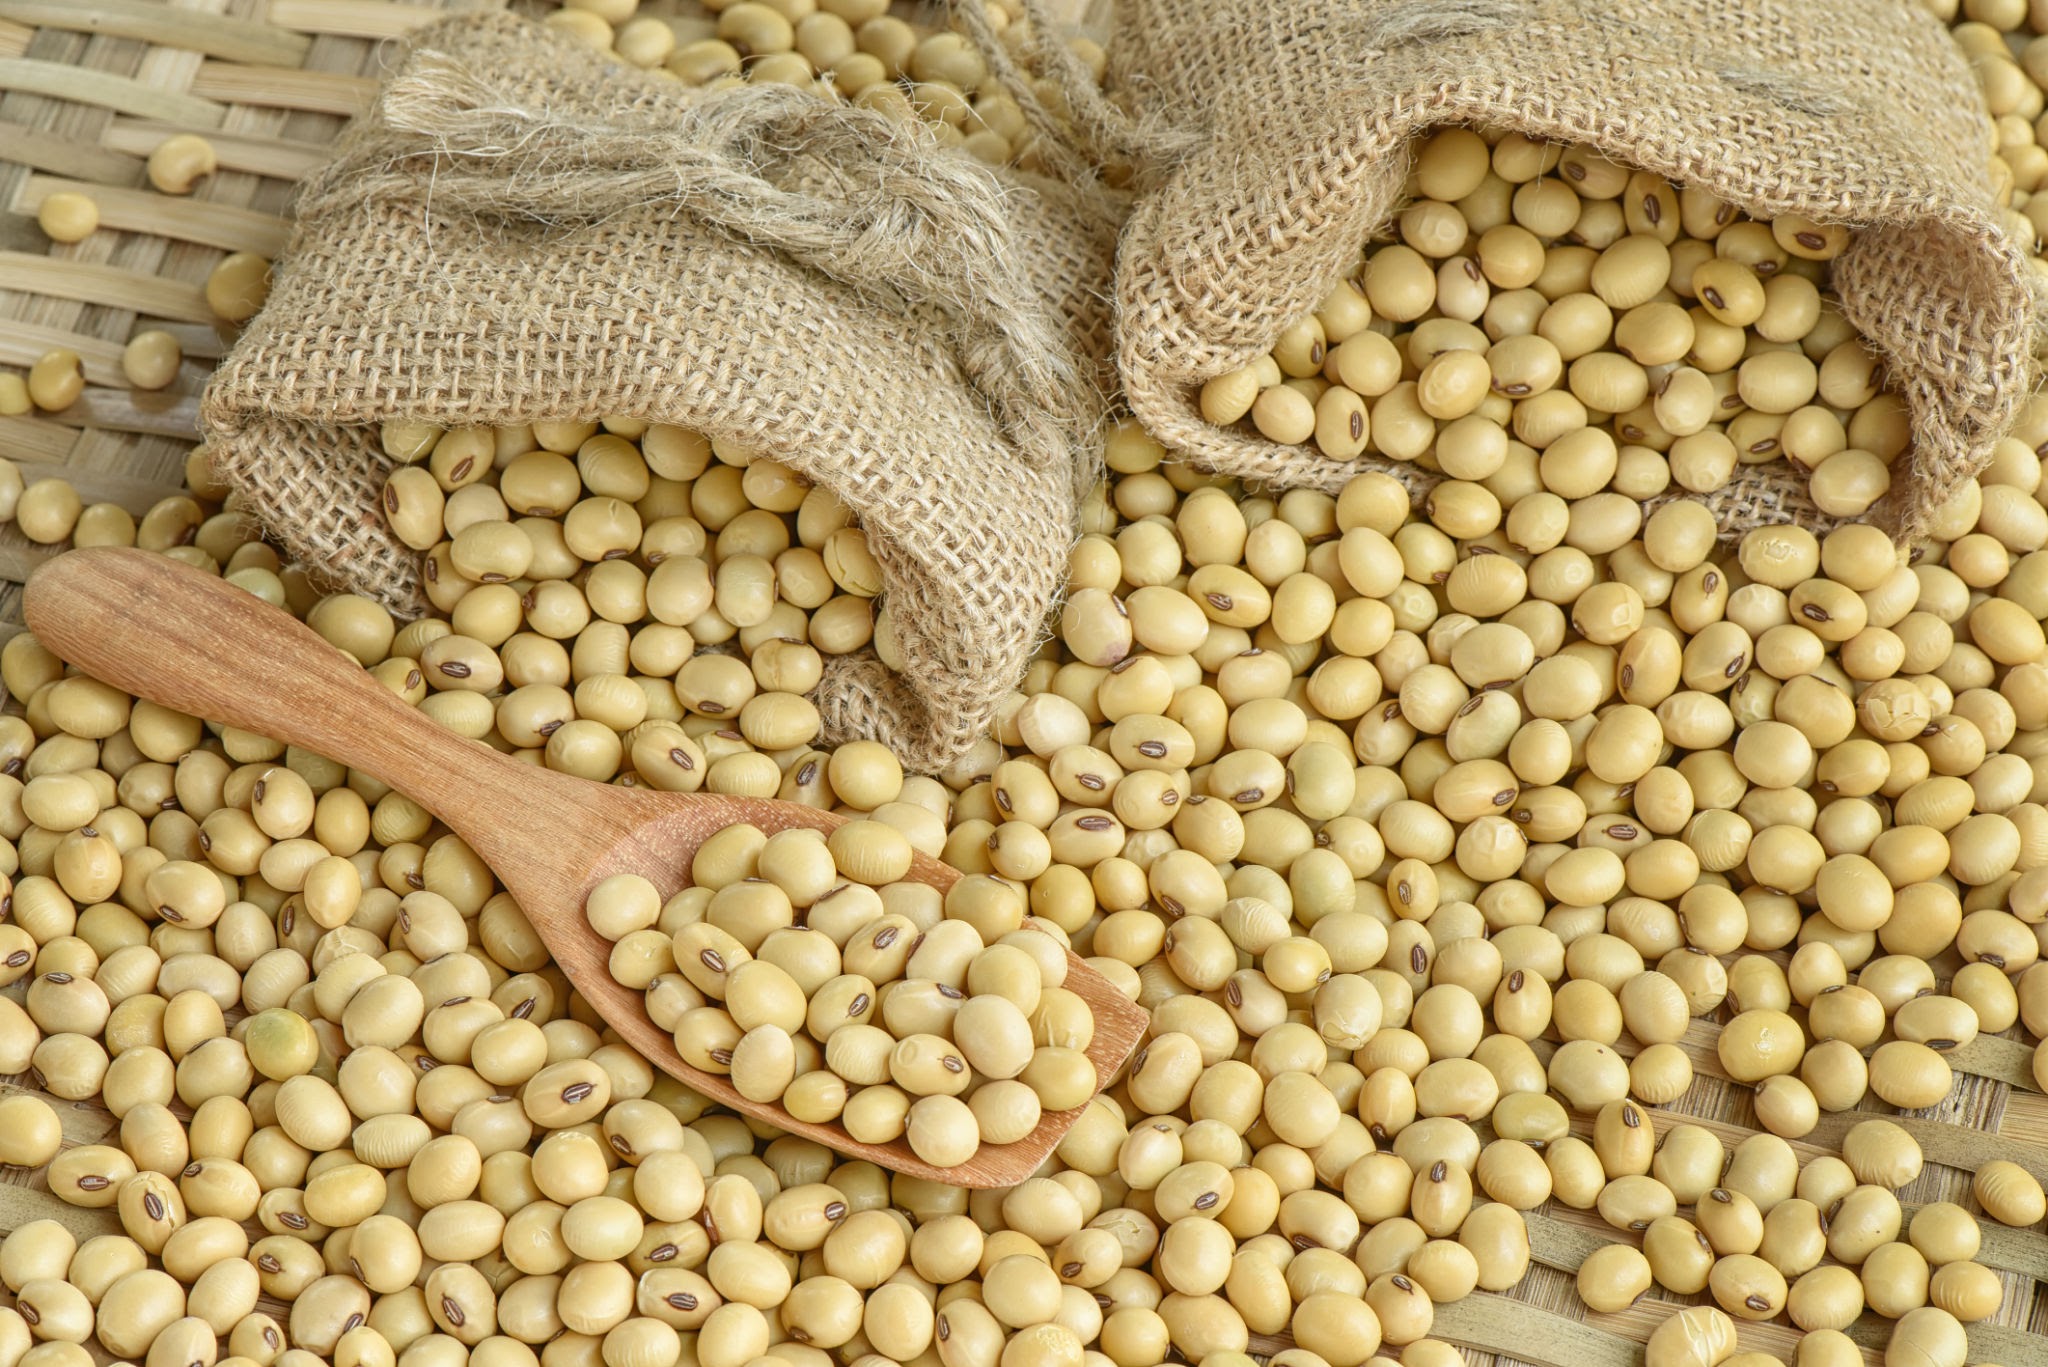  Export Quality Soy Bean From D.I Pvt. Ltd. from Delwai International Pvt Ltd